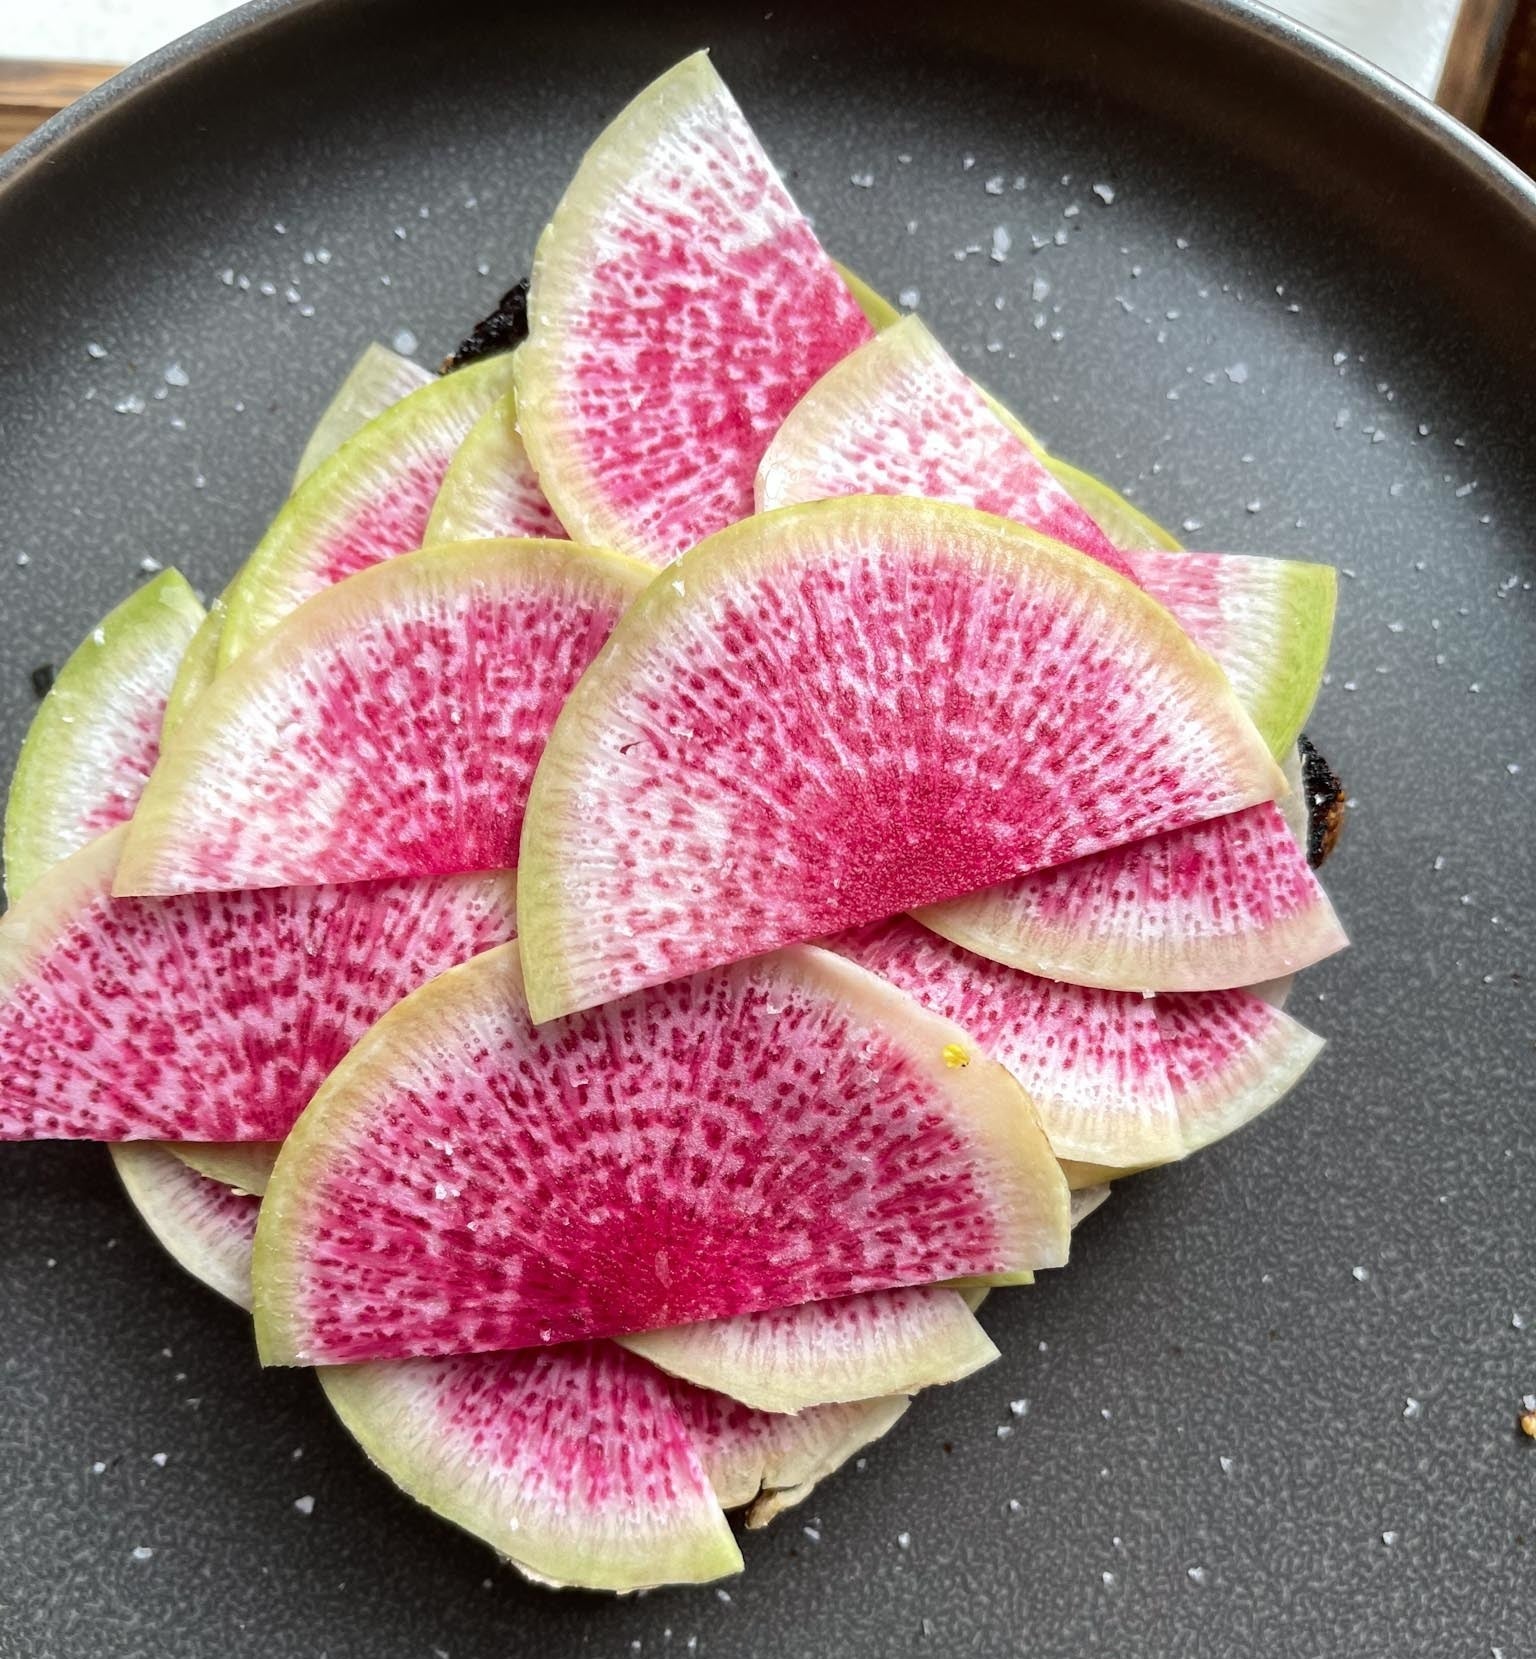 Thinly-sliced watermelon radishes on a piece of toast